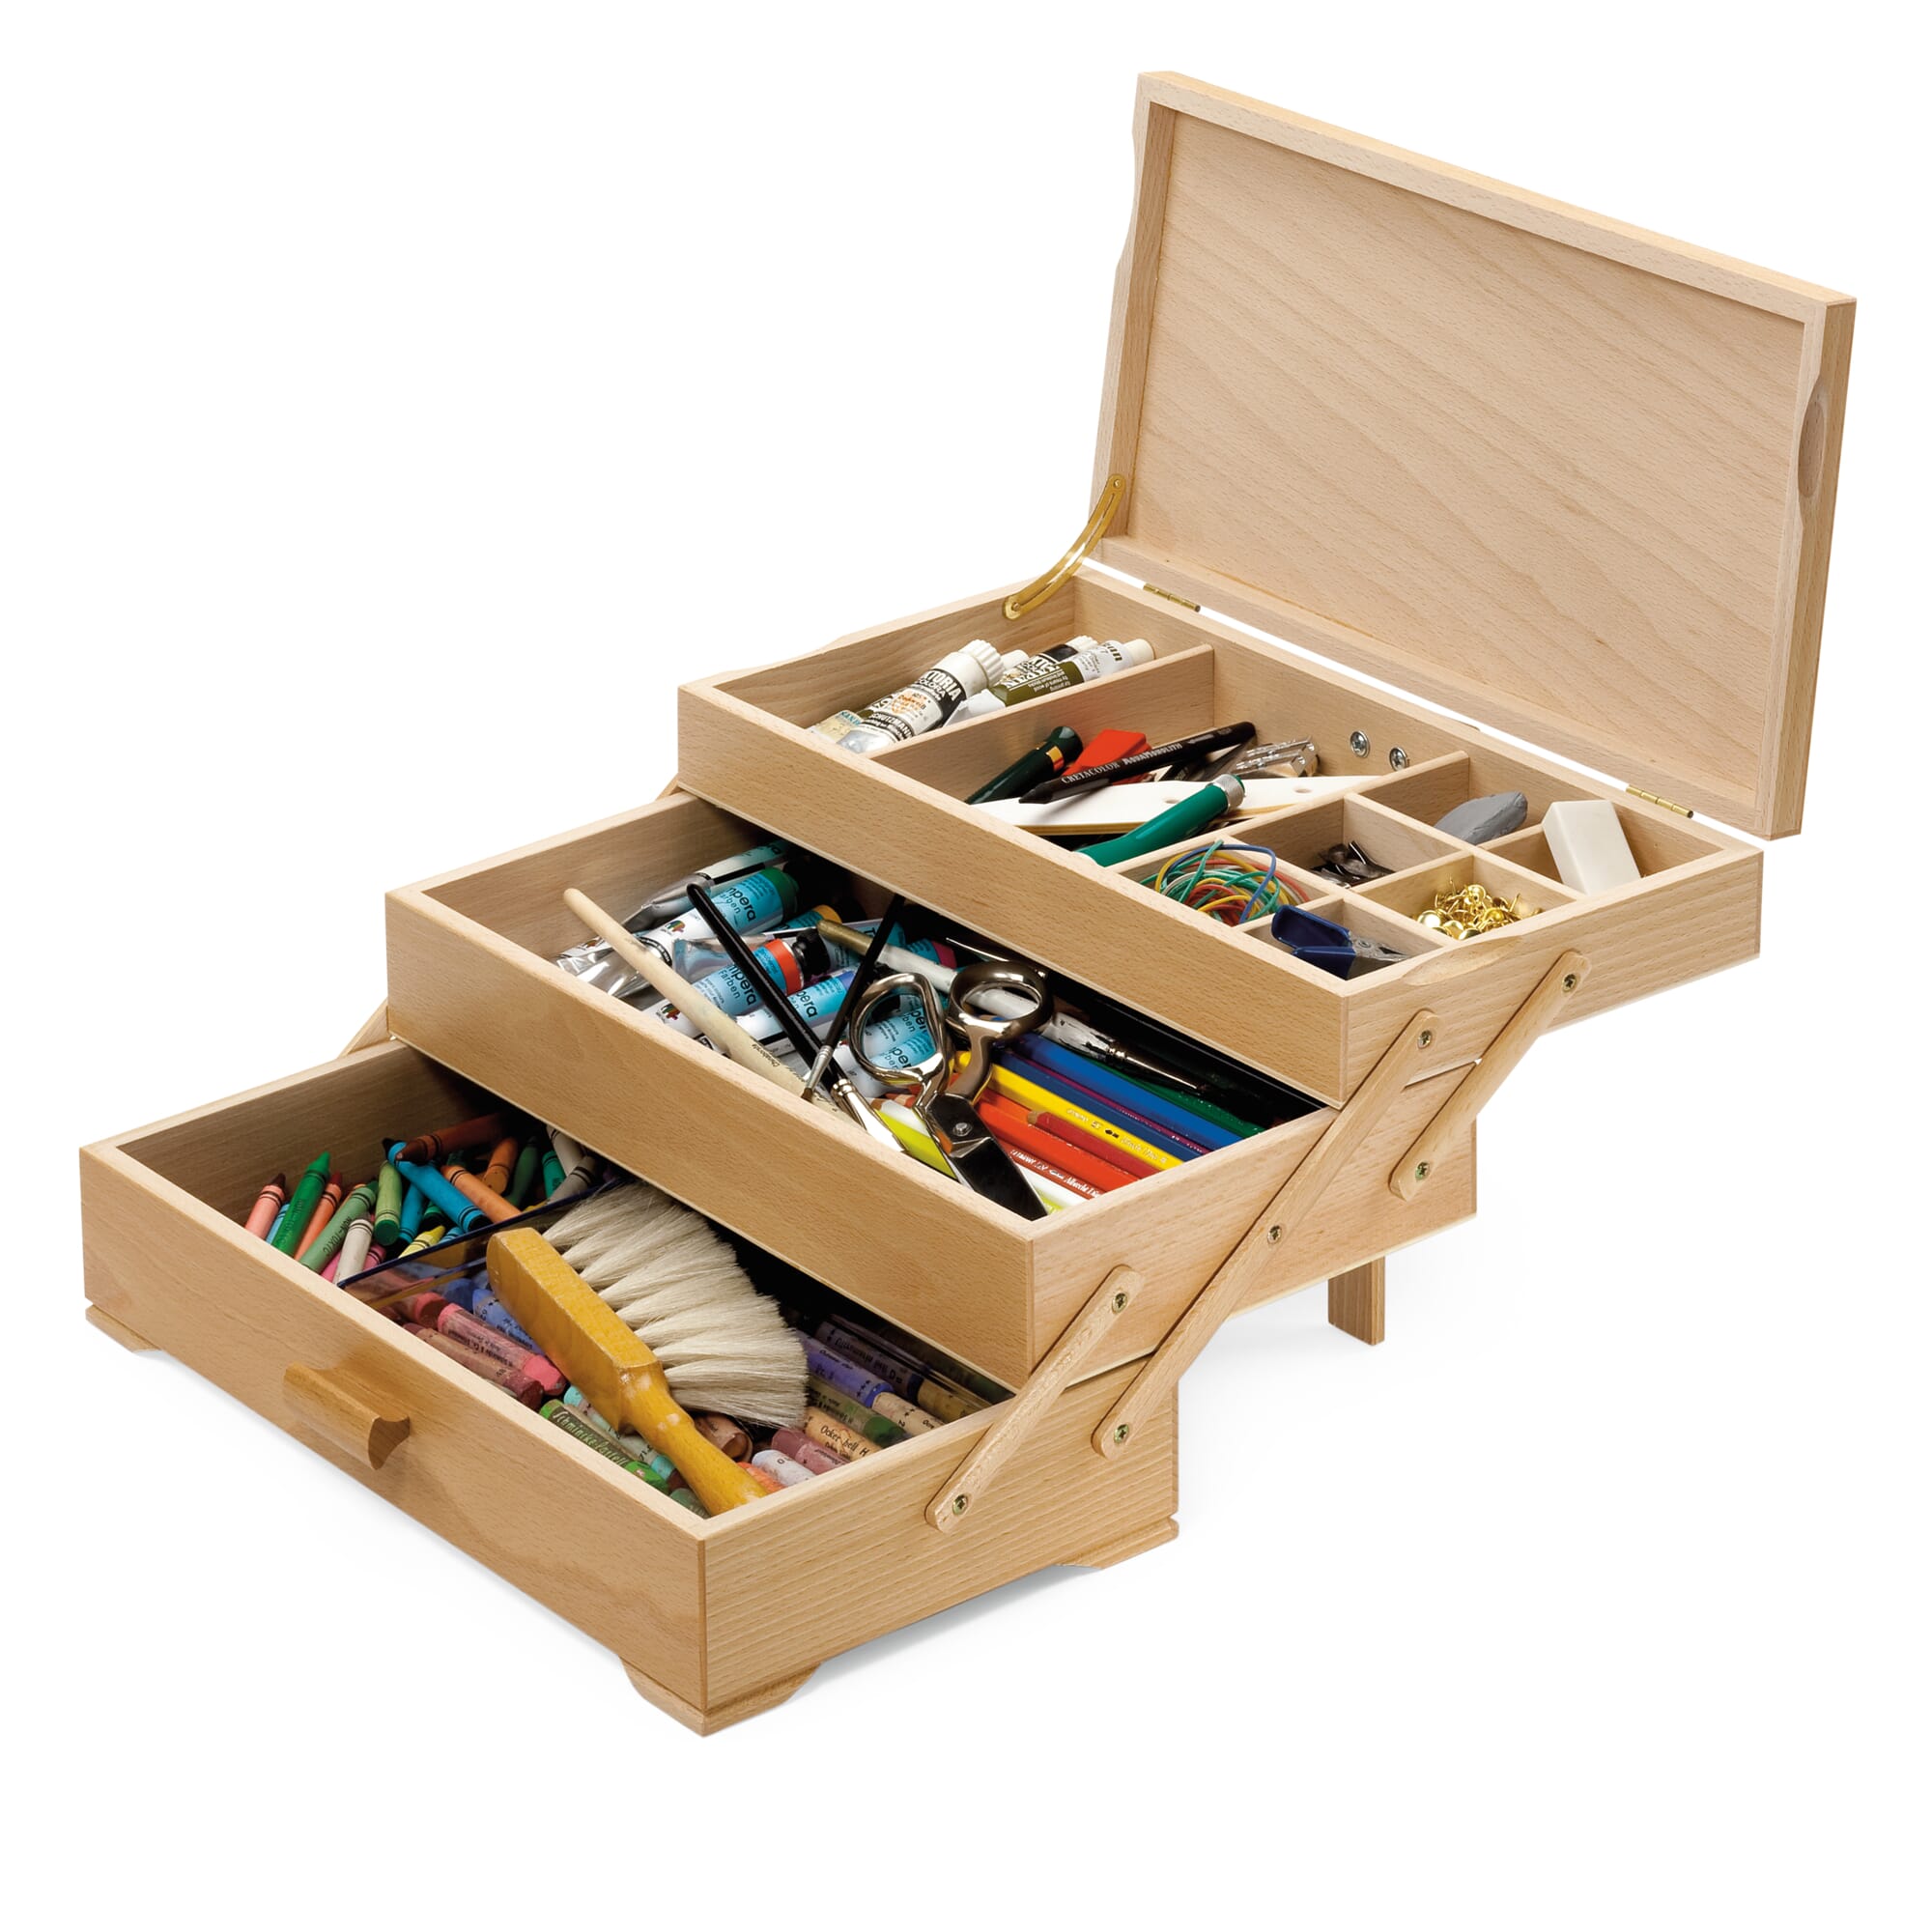 Box Sewing Accessories Wood, Wooden Sewing Box Accessories